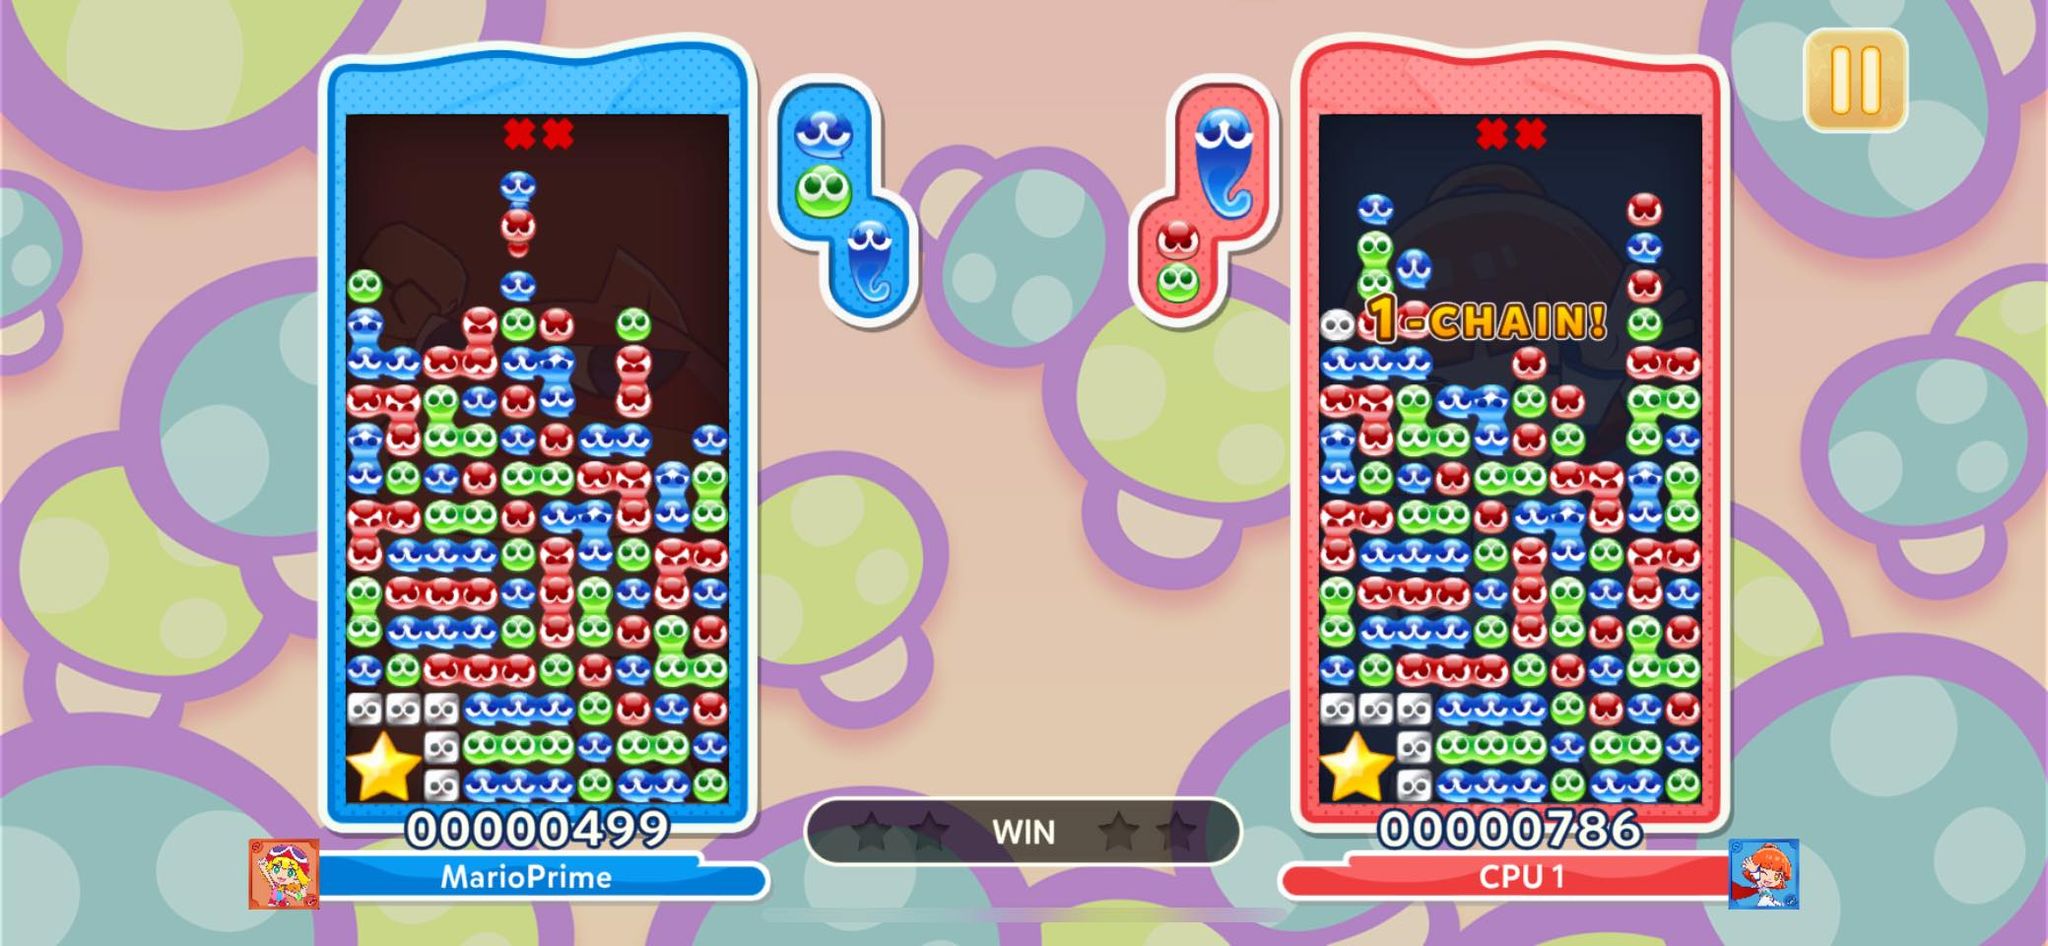 Players compete in Mini Excavation mode in Puyo Puyo Puzzle Pop.